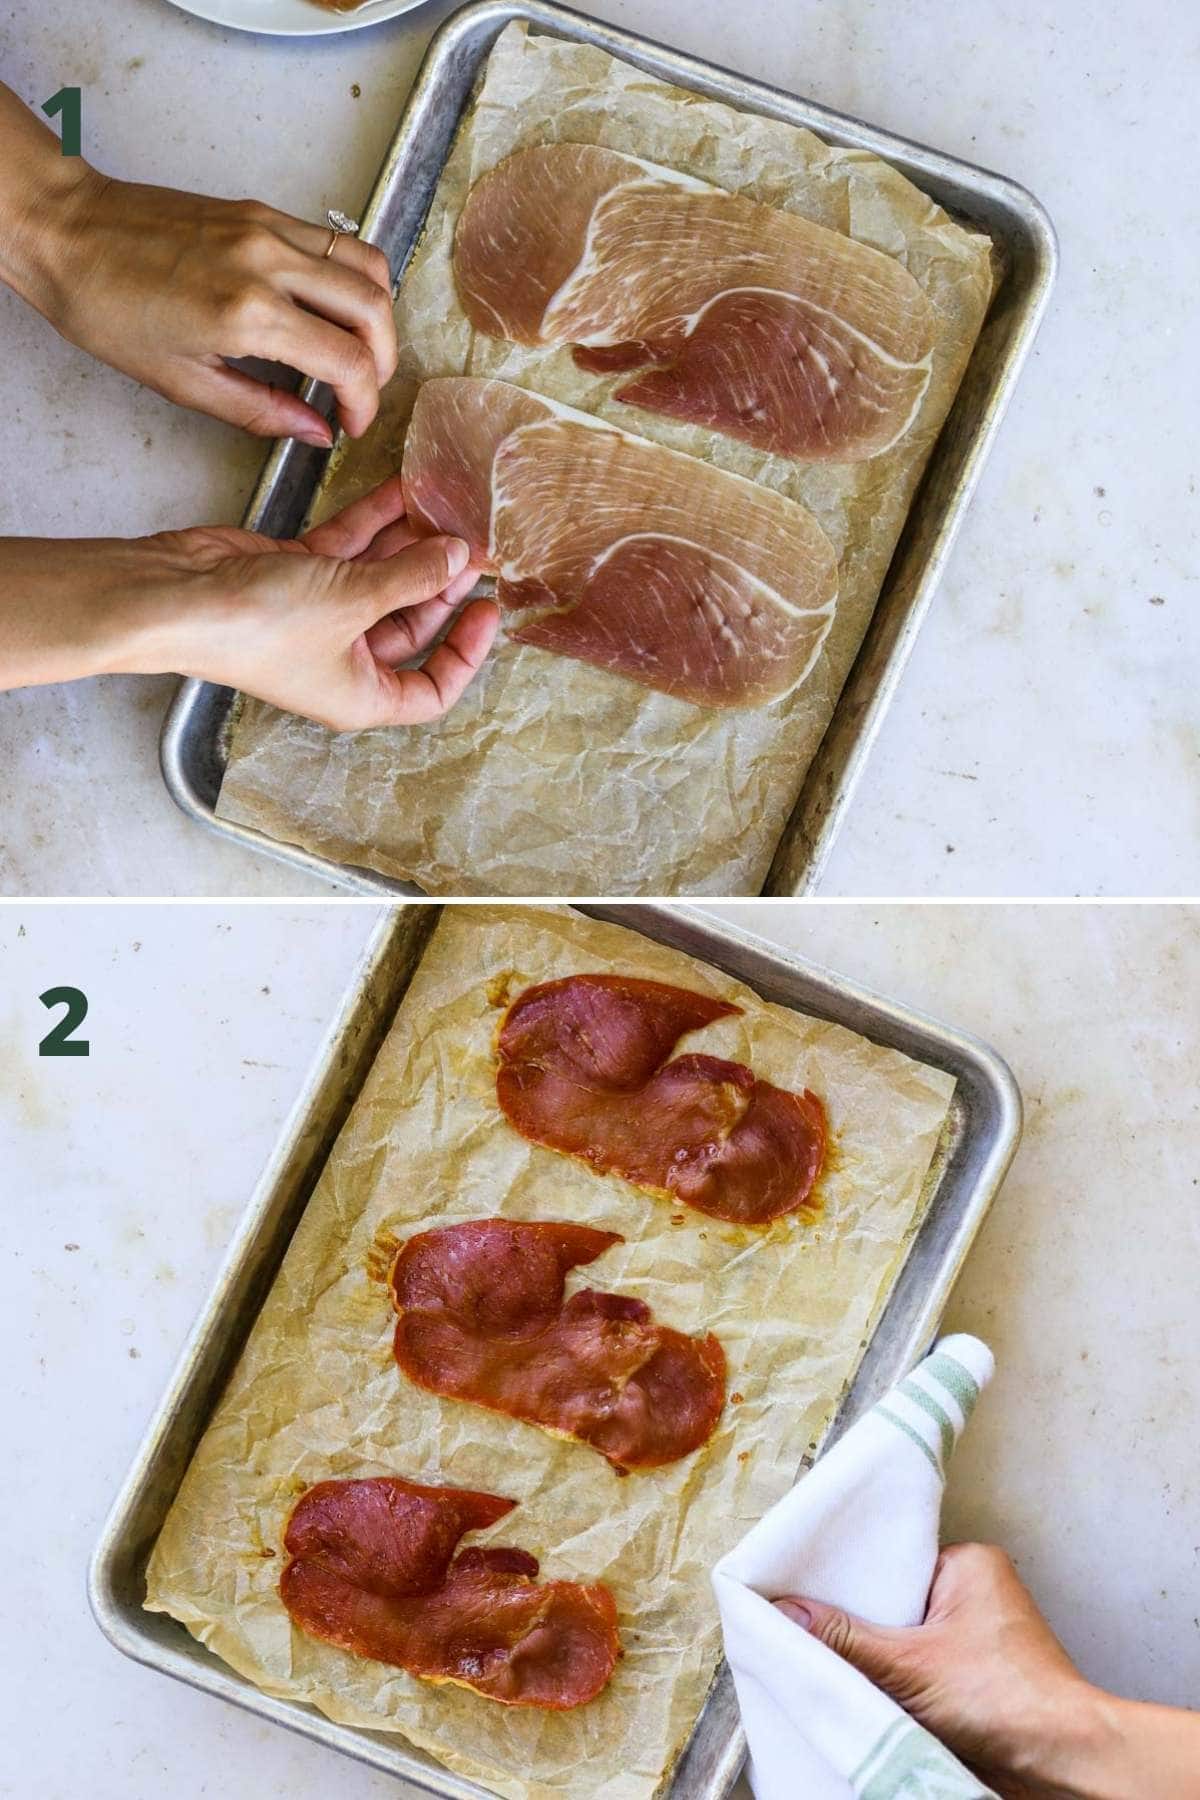 Steps to make crispy prosciutto, including placing the prosciutto on a parchment paper-lined baking tray and baking it in the oven to make it crispy.